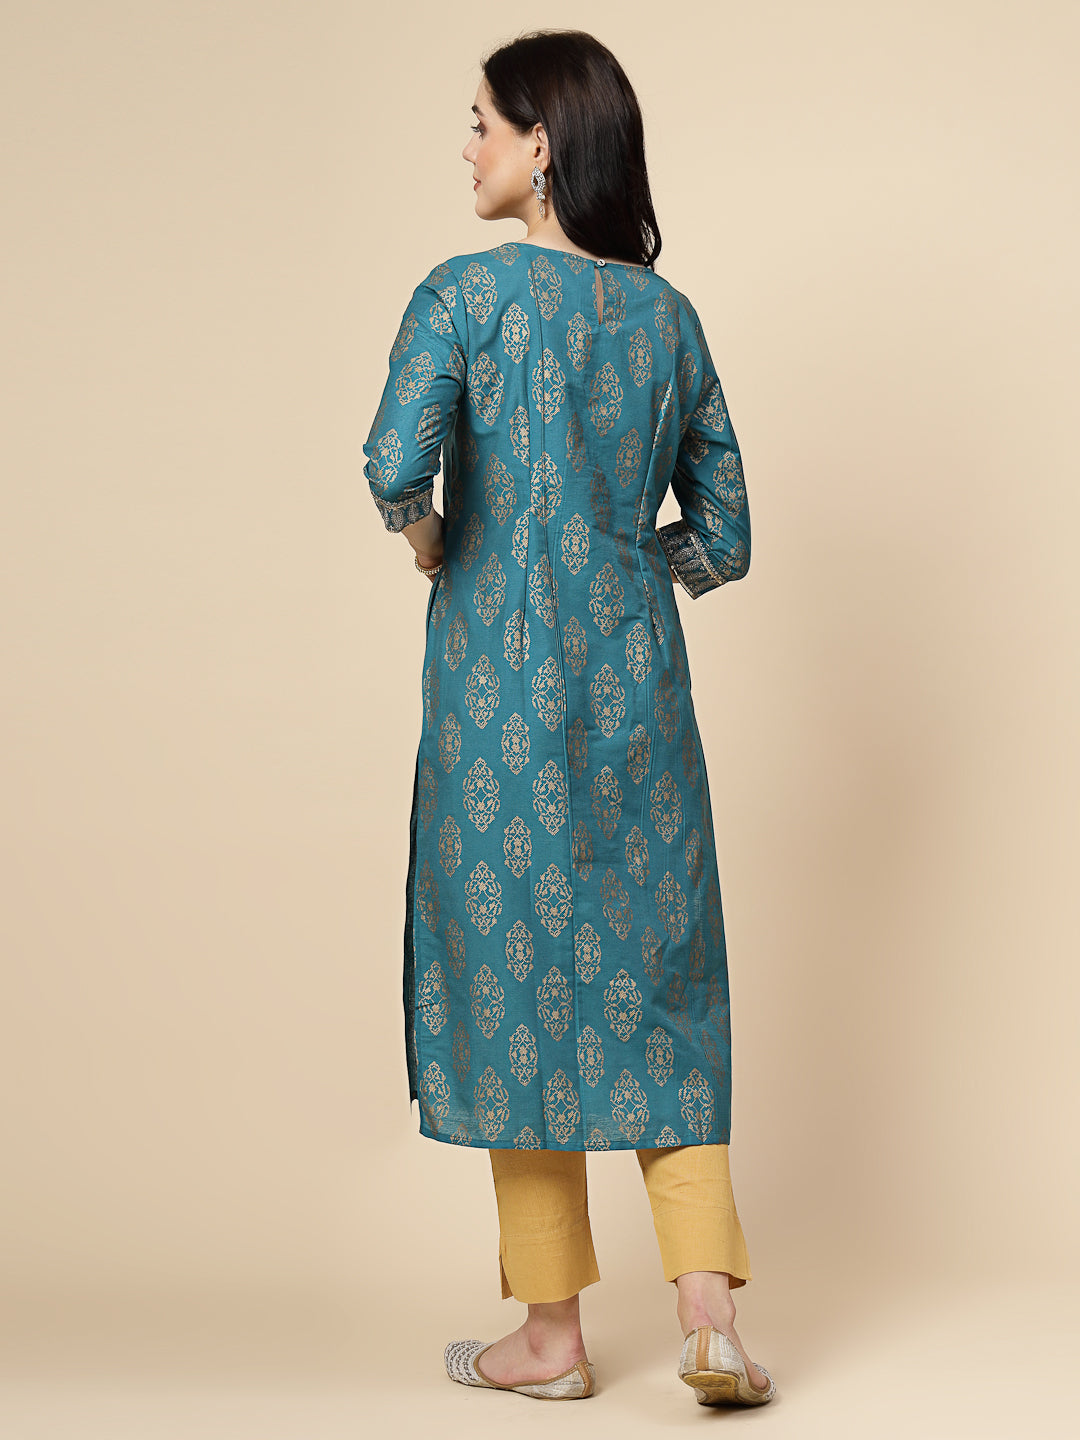 Women Teal  Blue  Color Embroidery Staright kurta